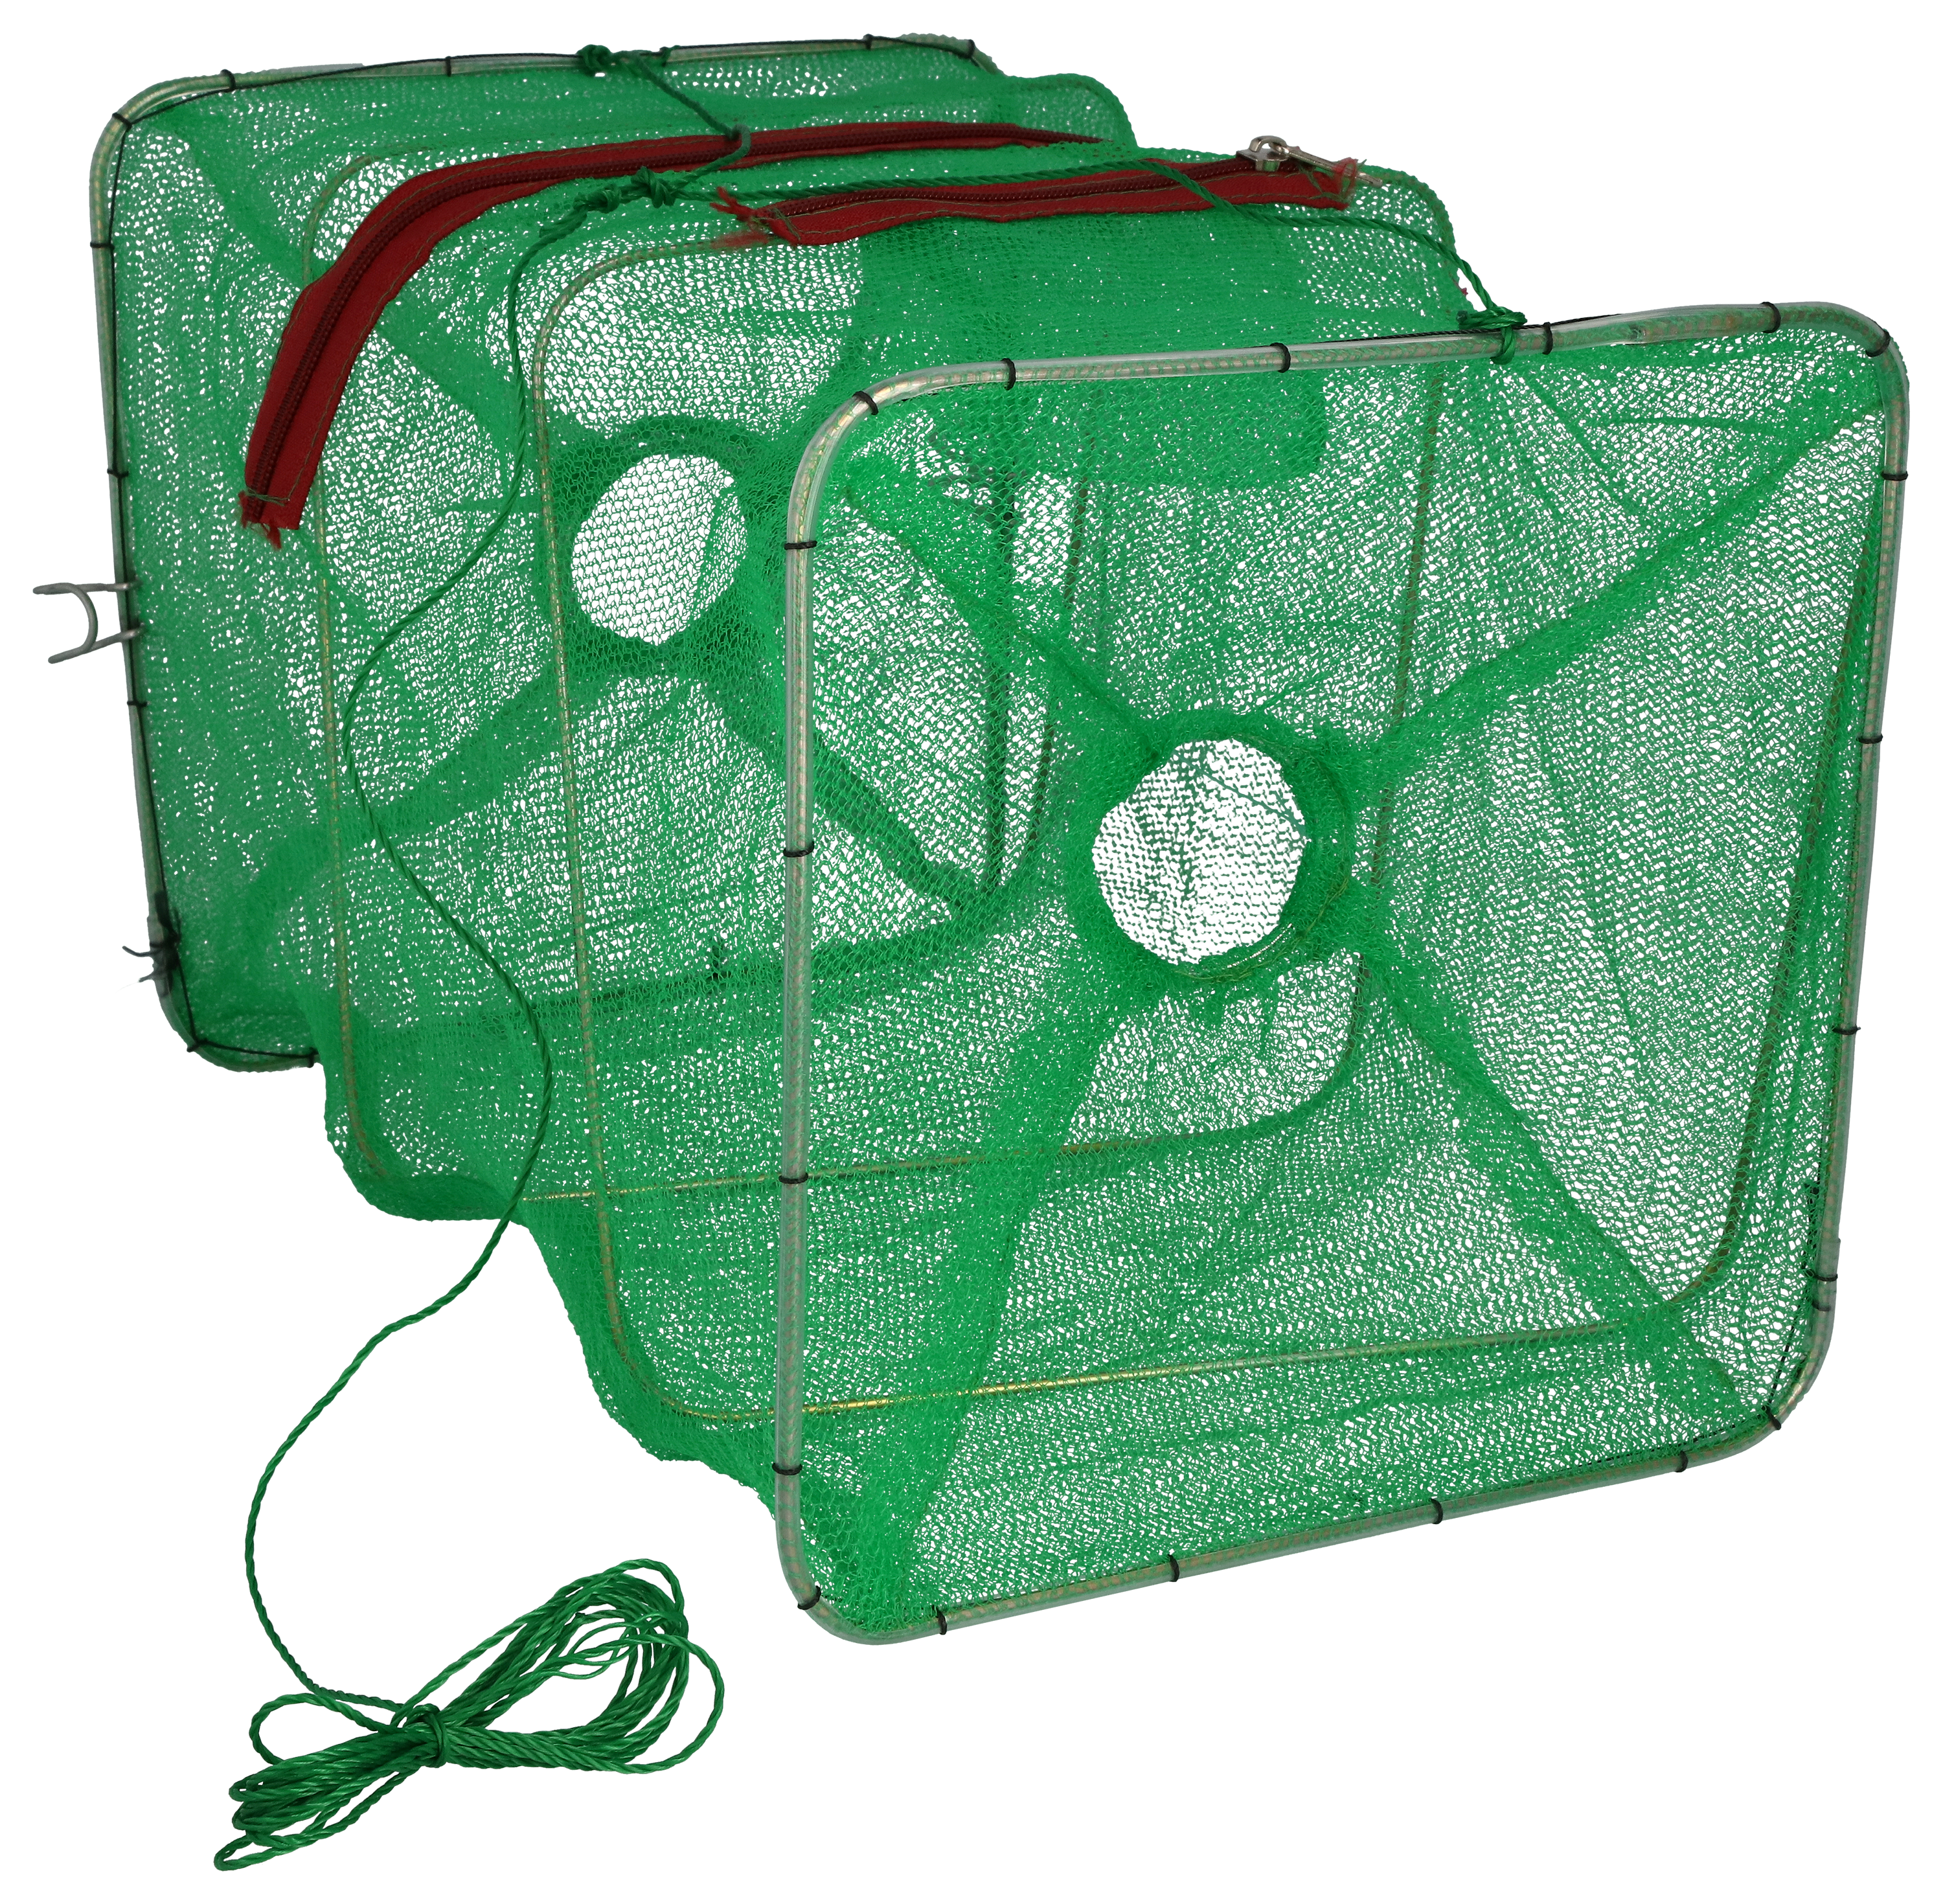 Offshore Angler Collapsible Live Bait Trap - 10 x 10 x 18 - Green